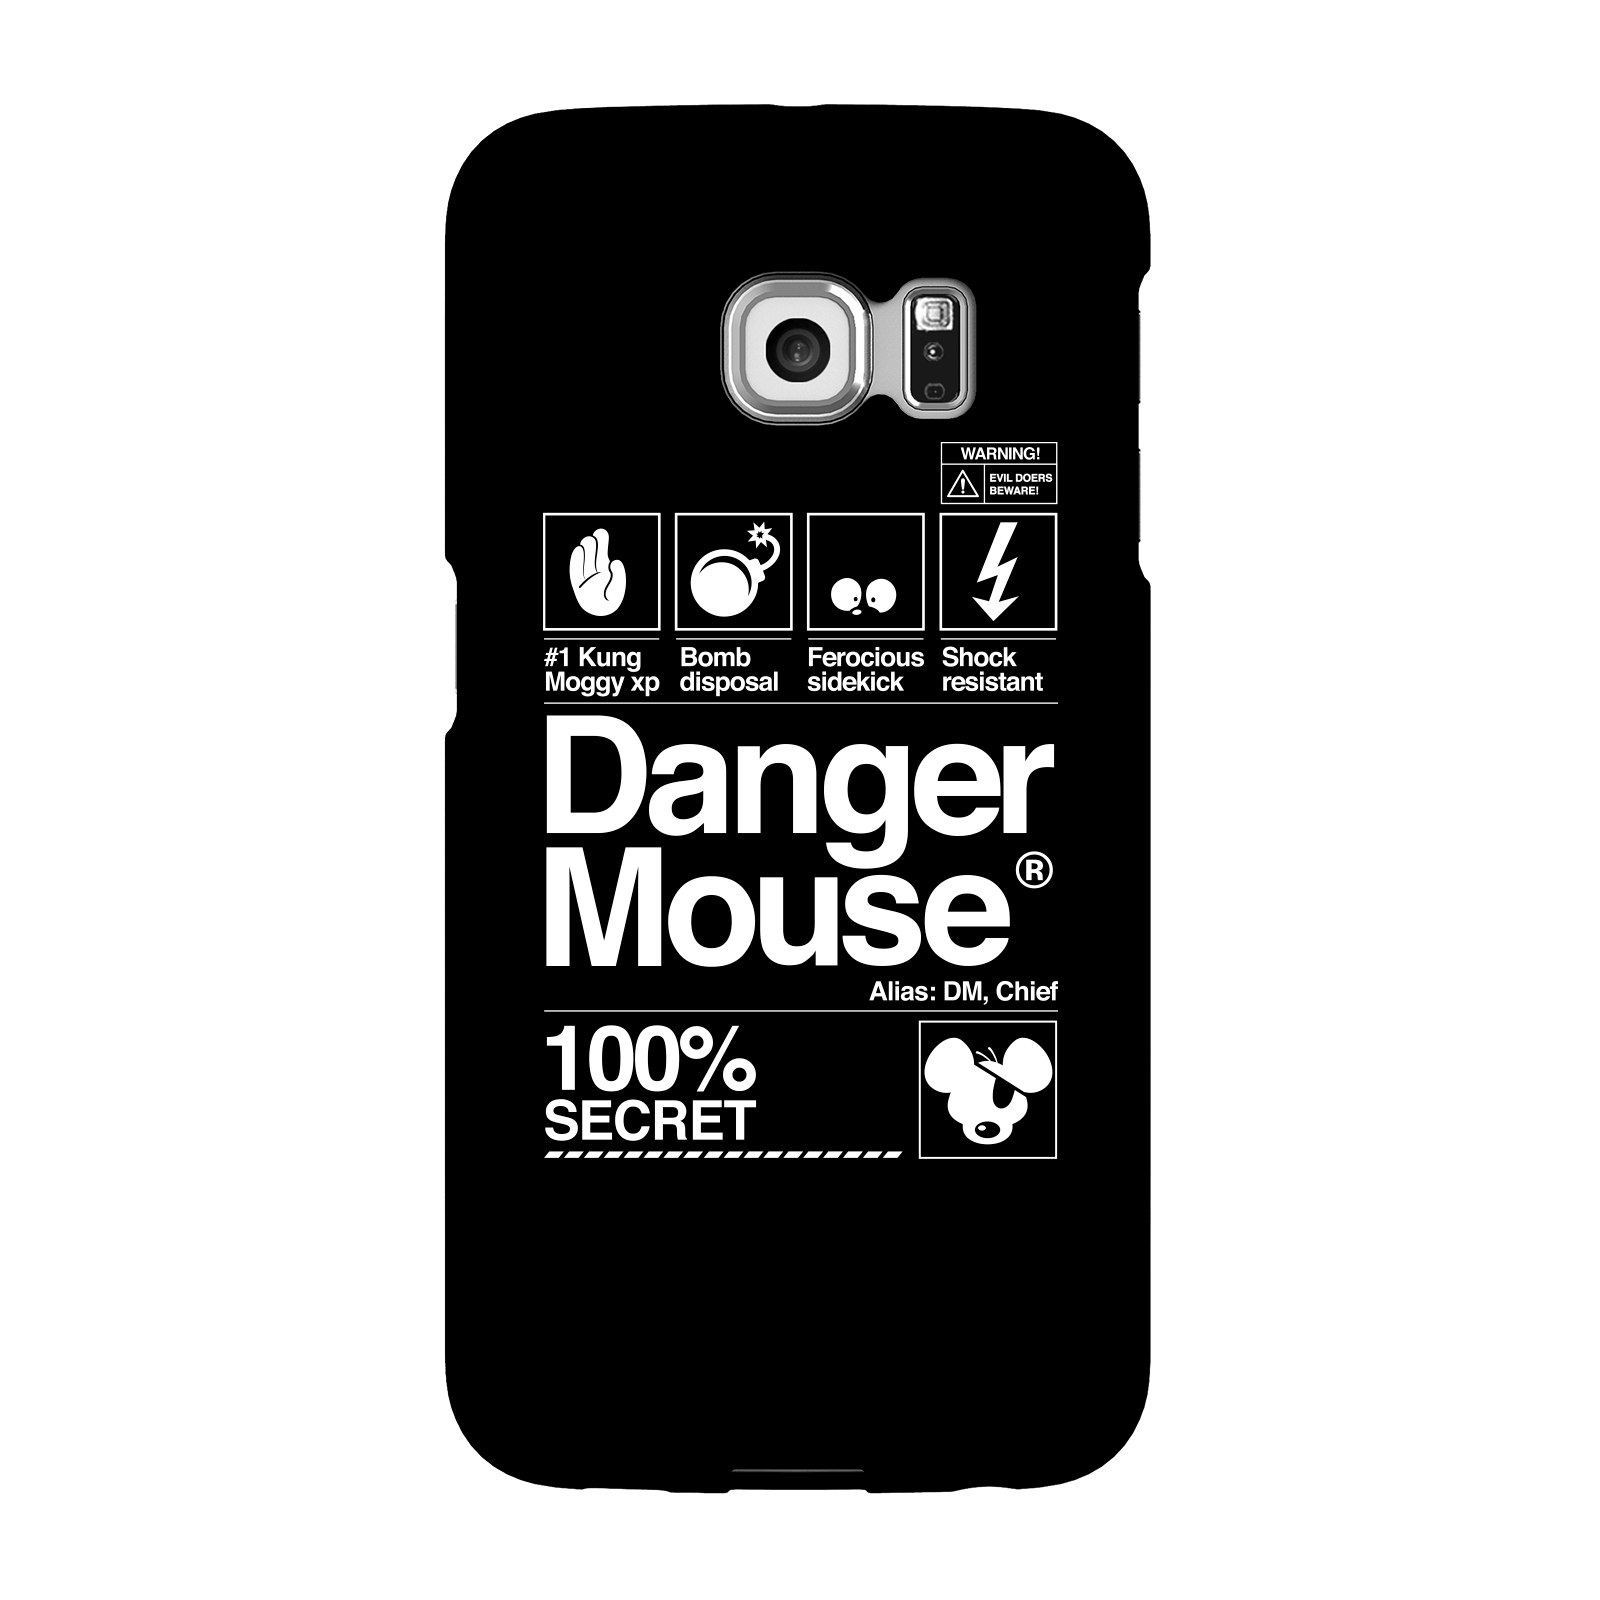 Danger Mouse 100% Secret Phone Case for iPhone and Android - Samsung S6 Edge Plus - Snap Case - Gloss